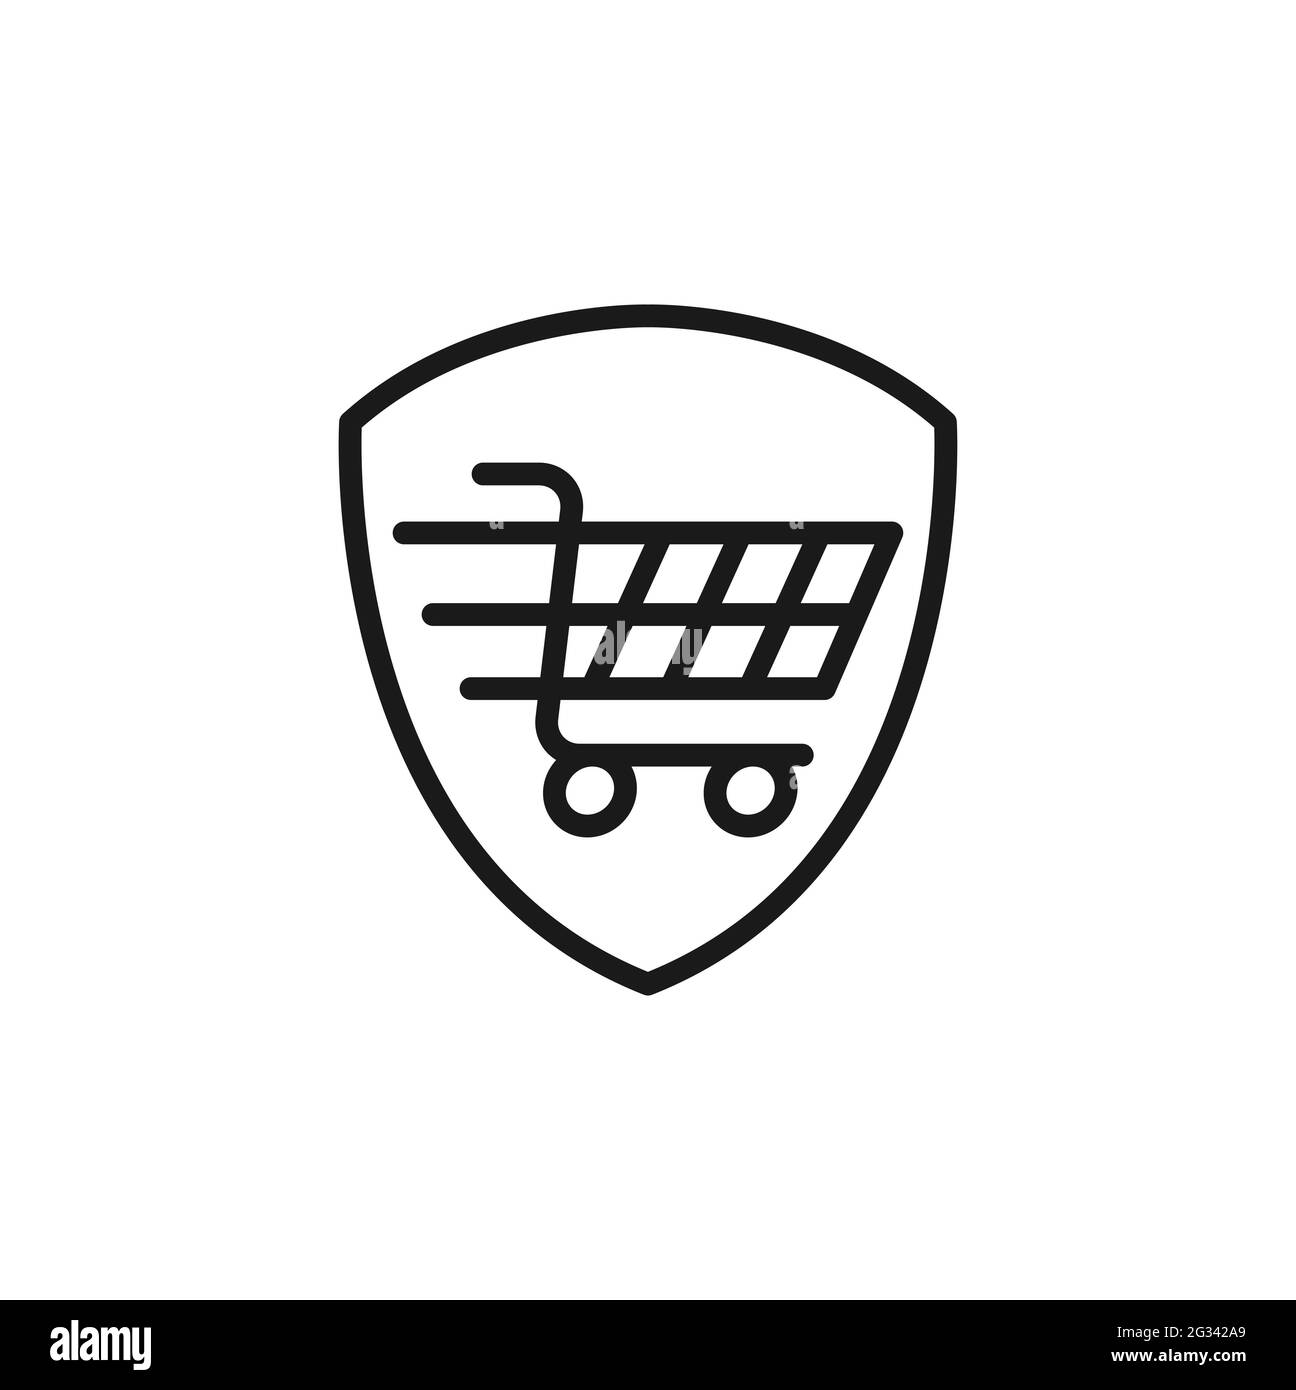 Secure Shopping icon Vector Illustration. Shopping Security and Safety with Shield icon design concept for e-commerce, online store and marketplace we Stock Vector